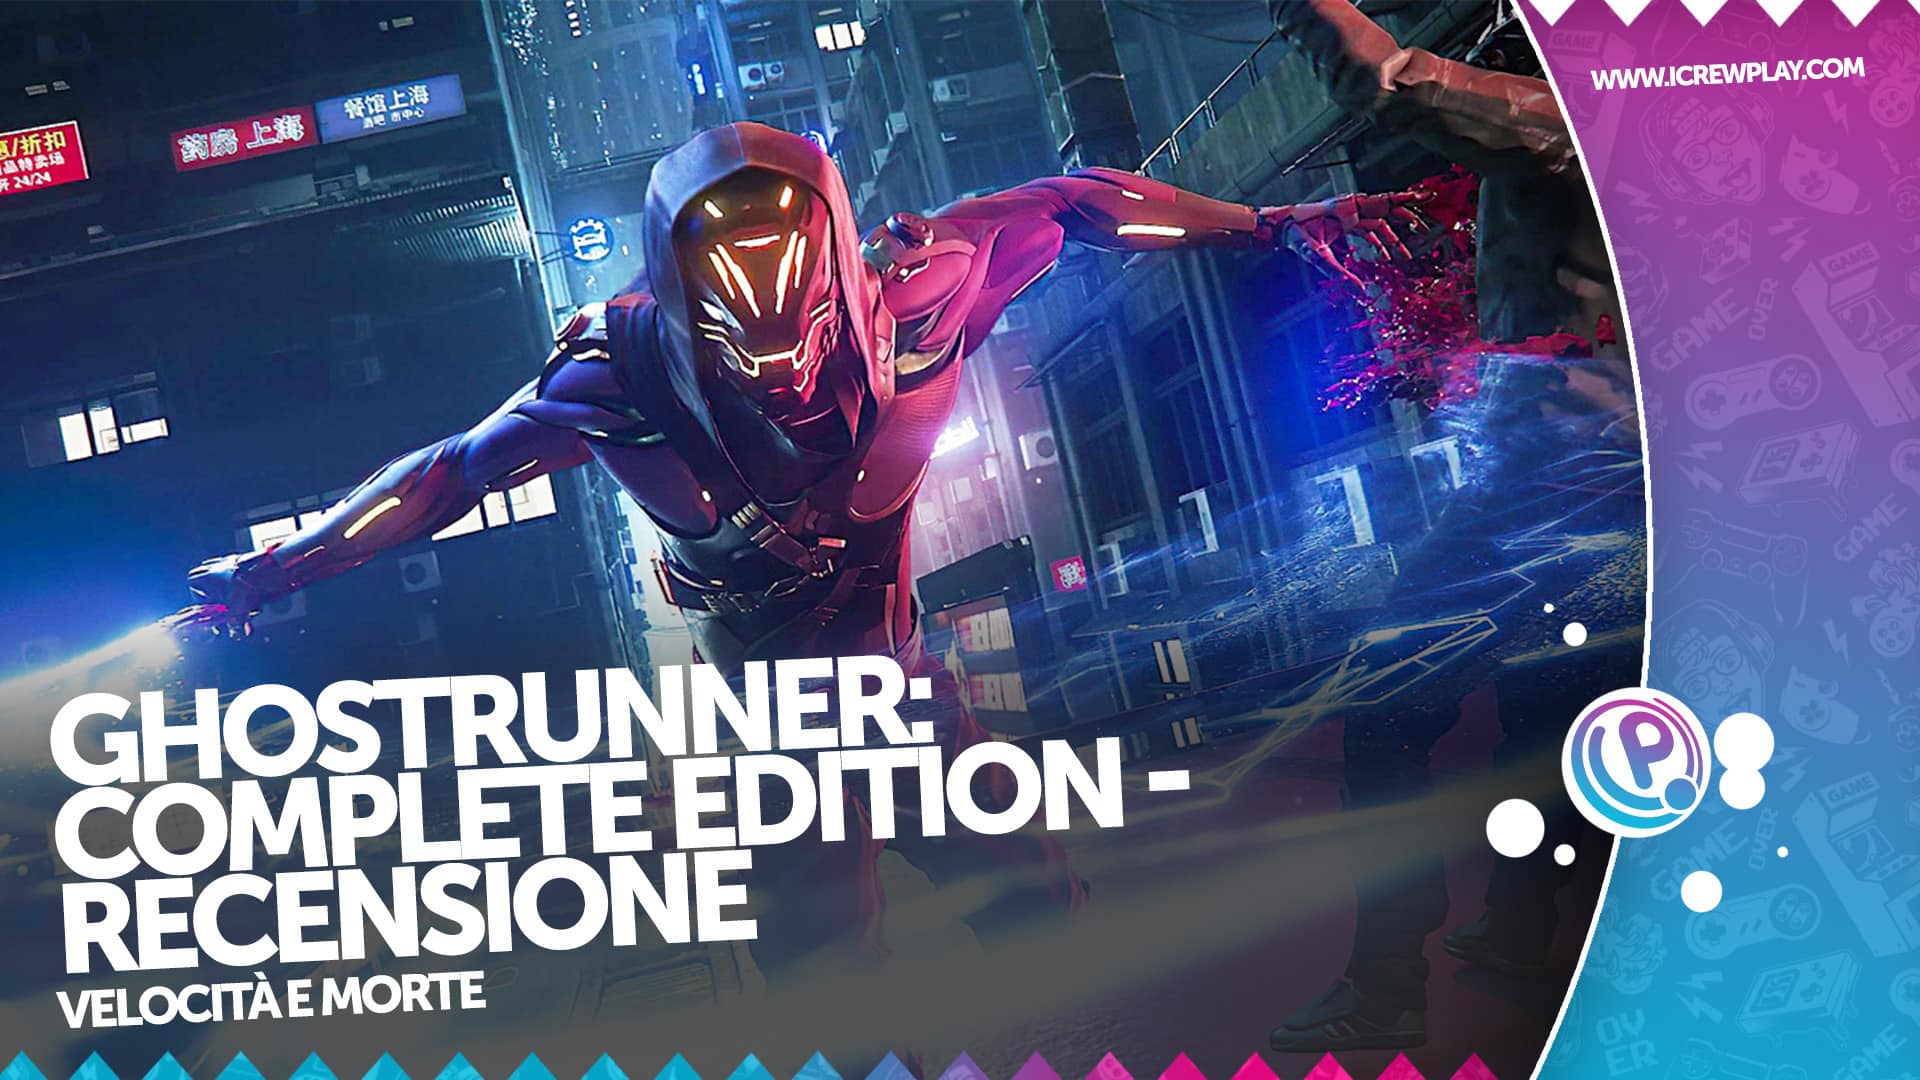 Ghostrunner: Complete Edition - Recensione per PlayStation 5 12